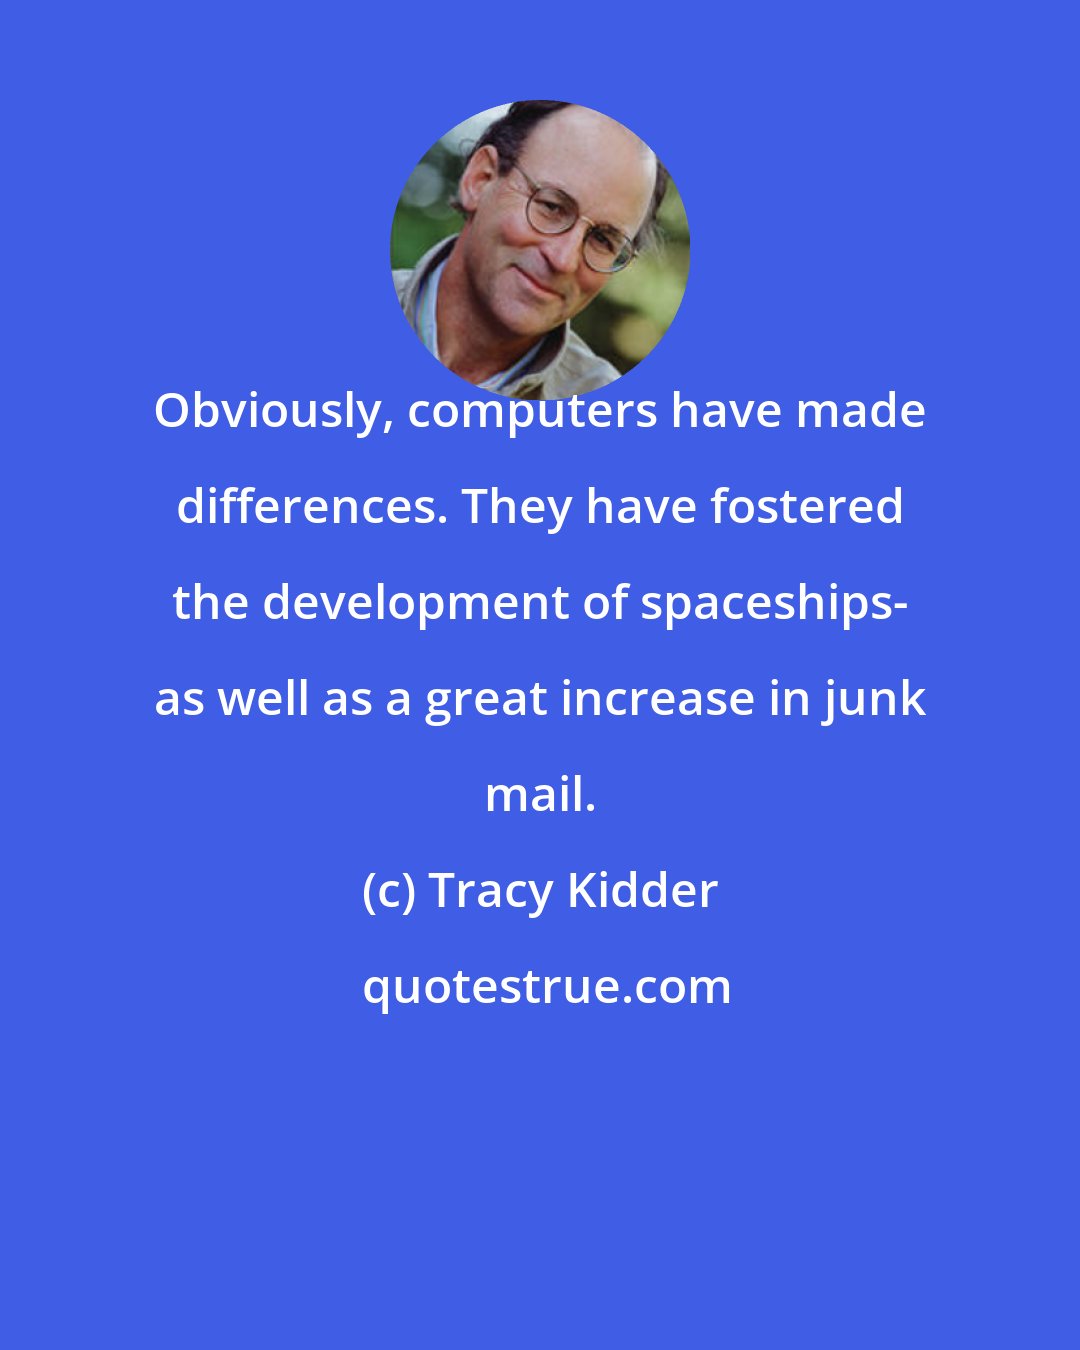 Tracy Kidder: Obviously, computers have made differences. They have fostered the development of spaceships- as well as a great increase in junk mail.